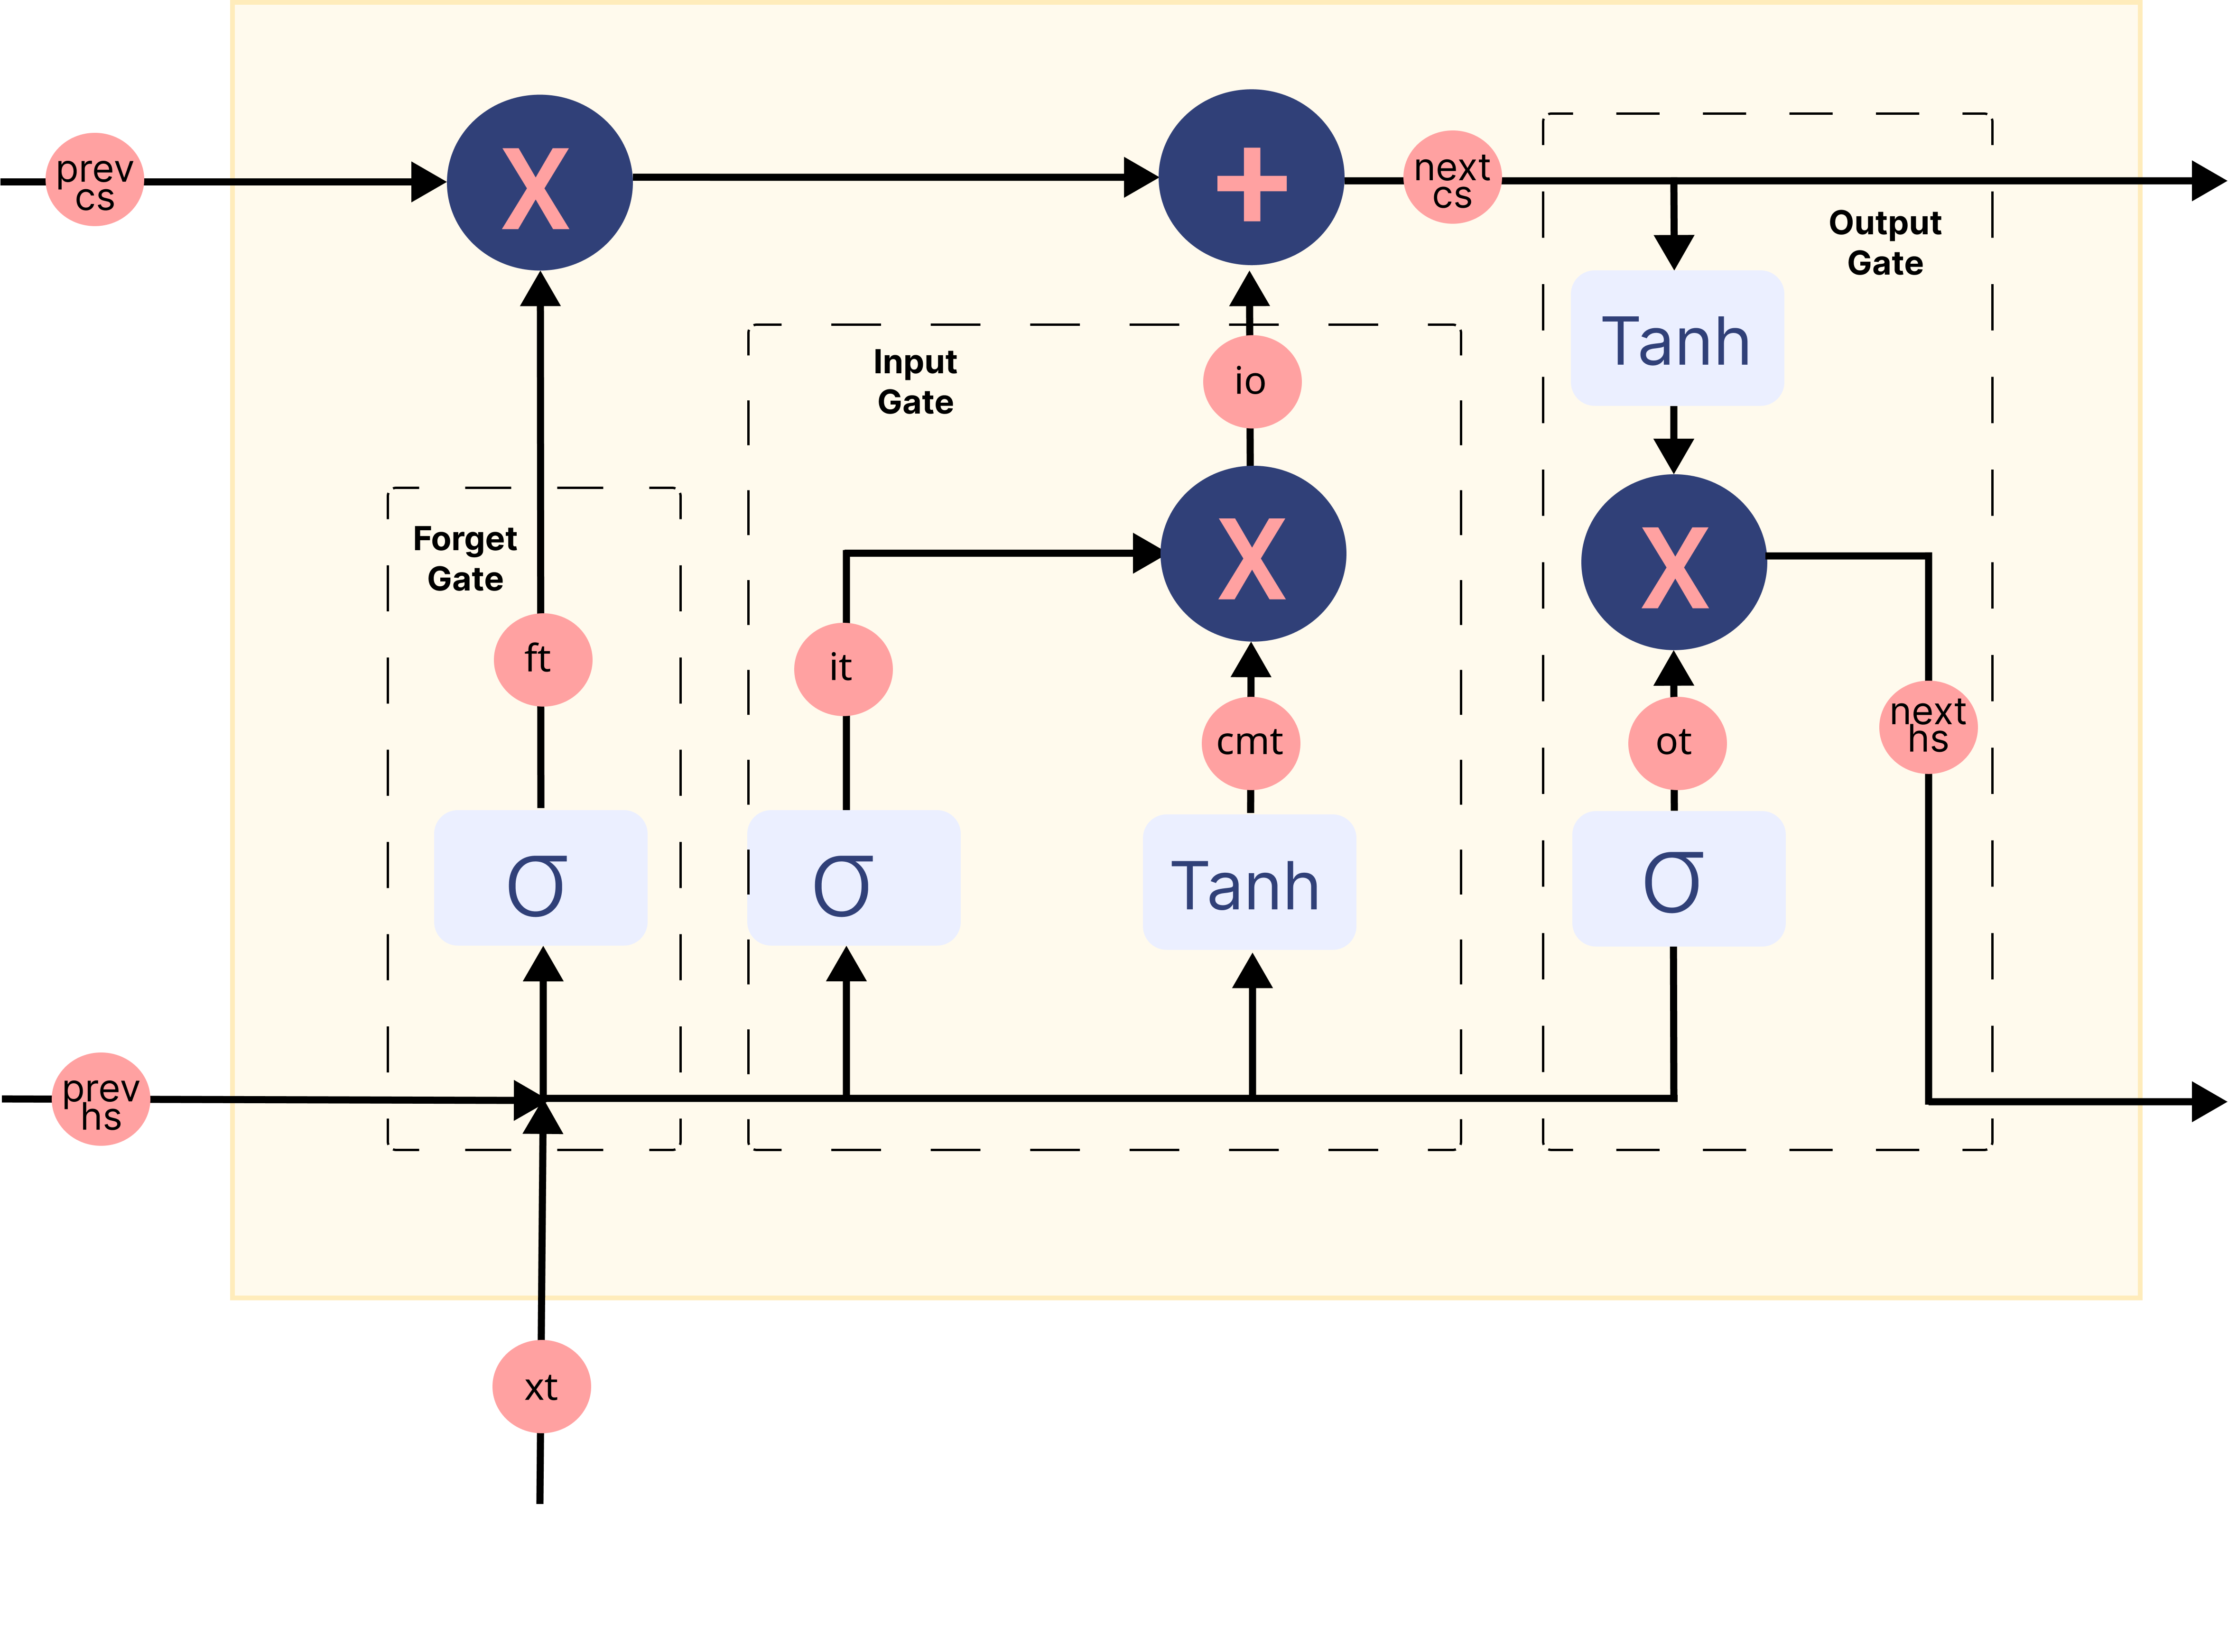 Diagram showing three sections of a memory block, labeled "Forget gate", "Input gate" and "Output gate". Each gate contains several subparts, representing the operations performed at that stage of the process.